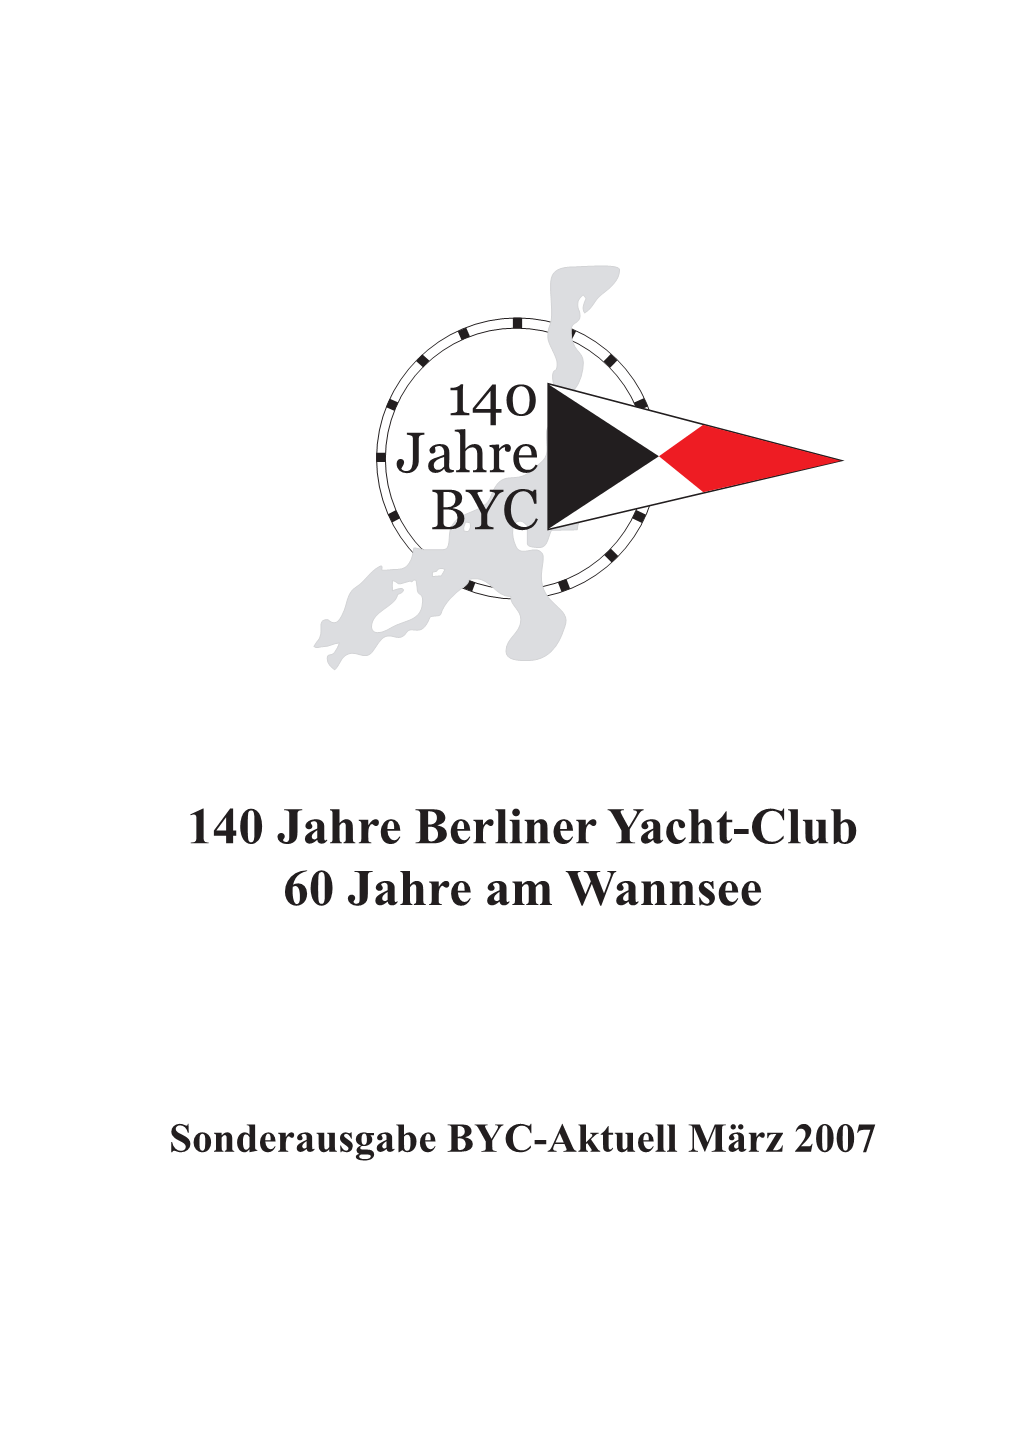 140 Jahre BYC